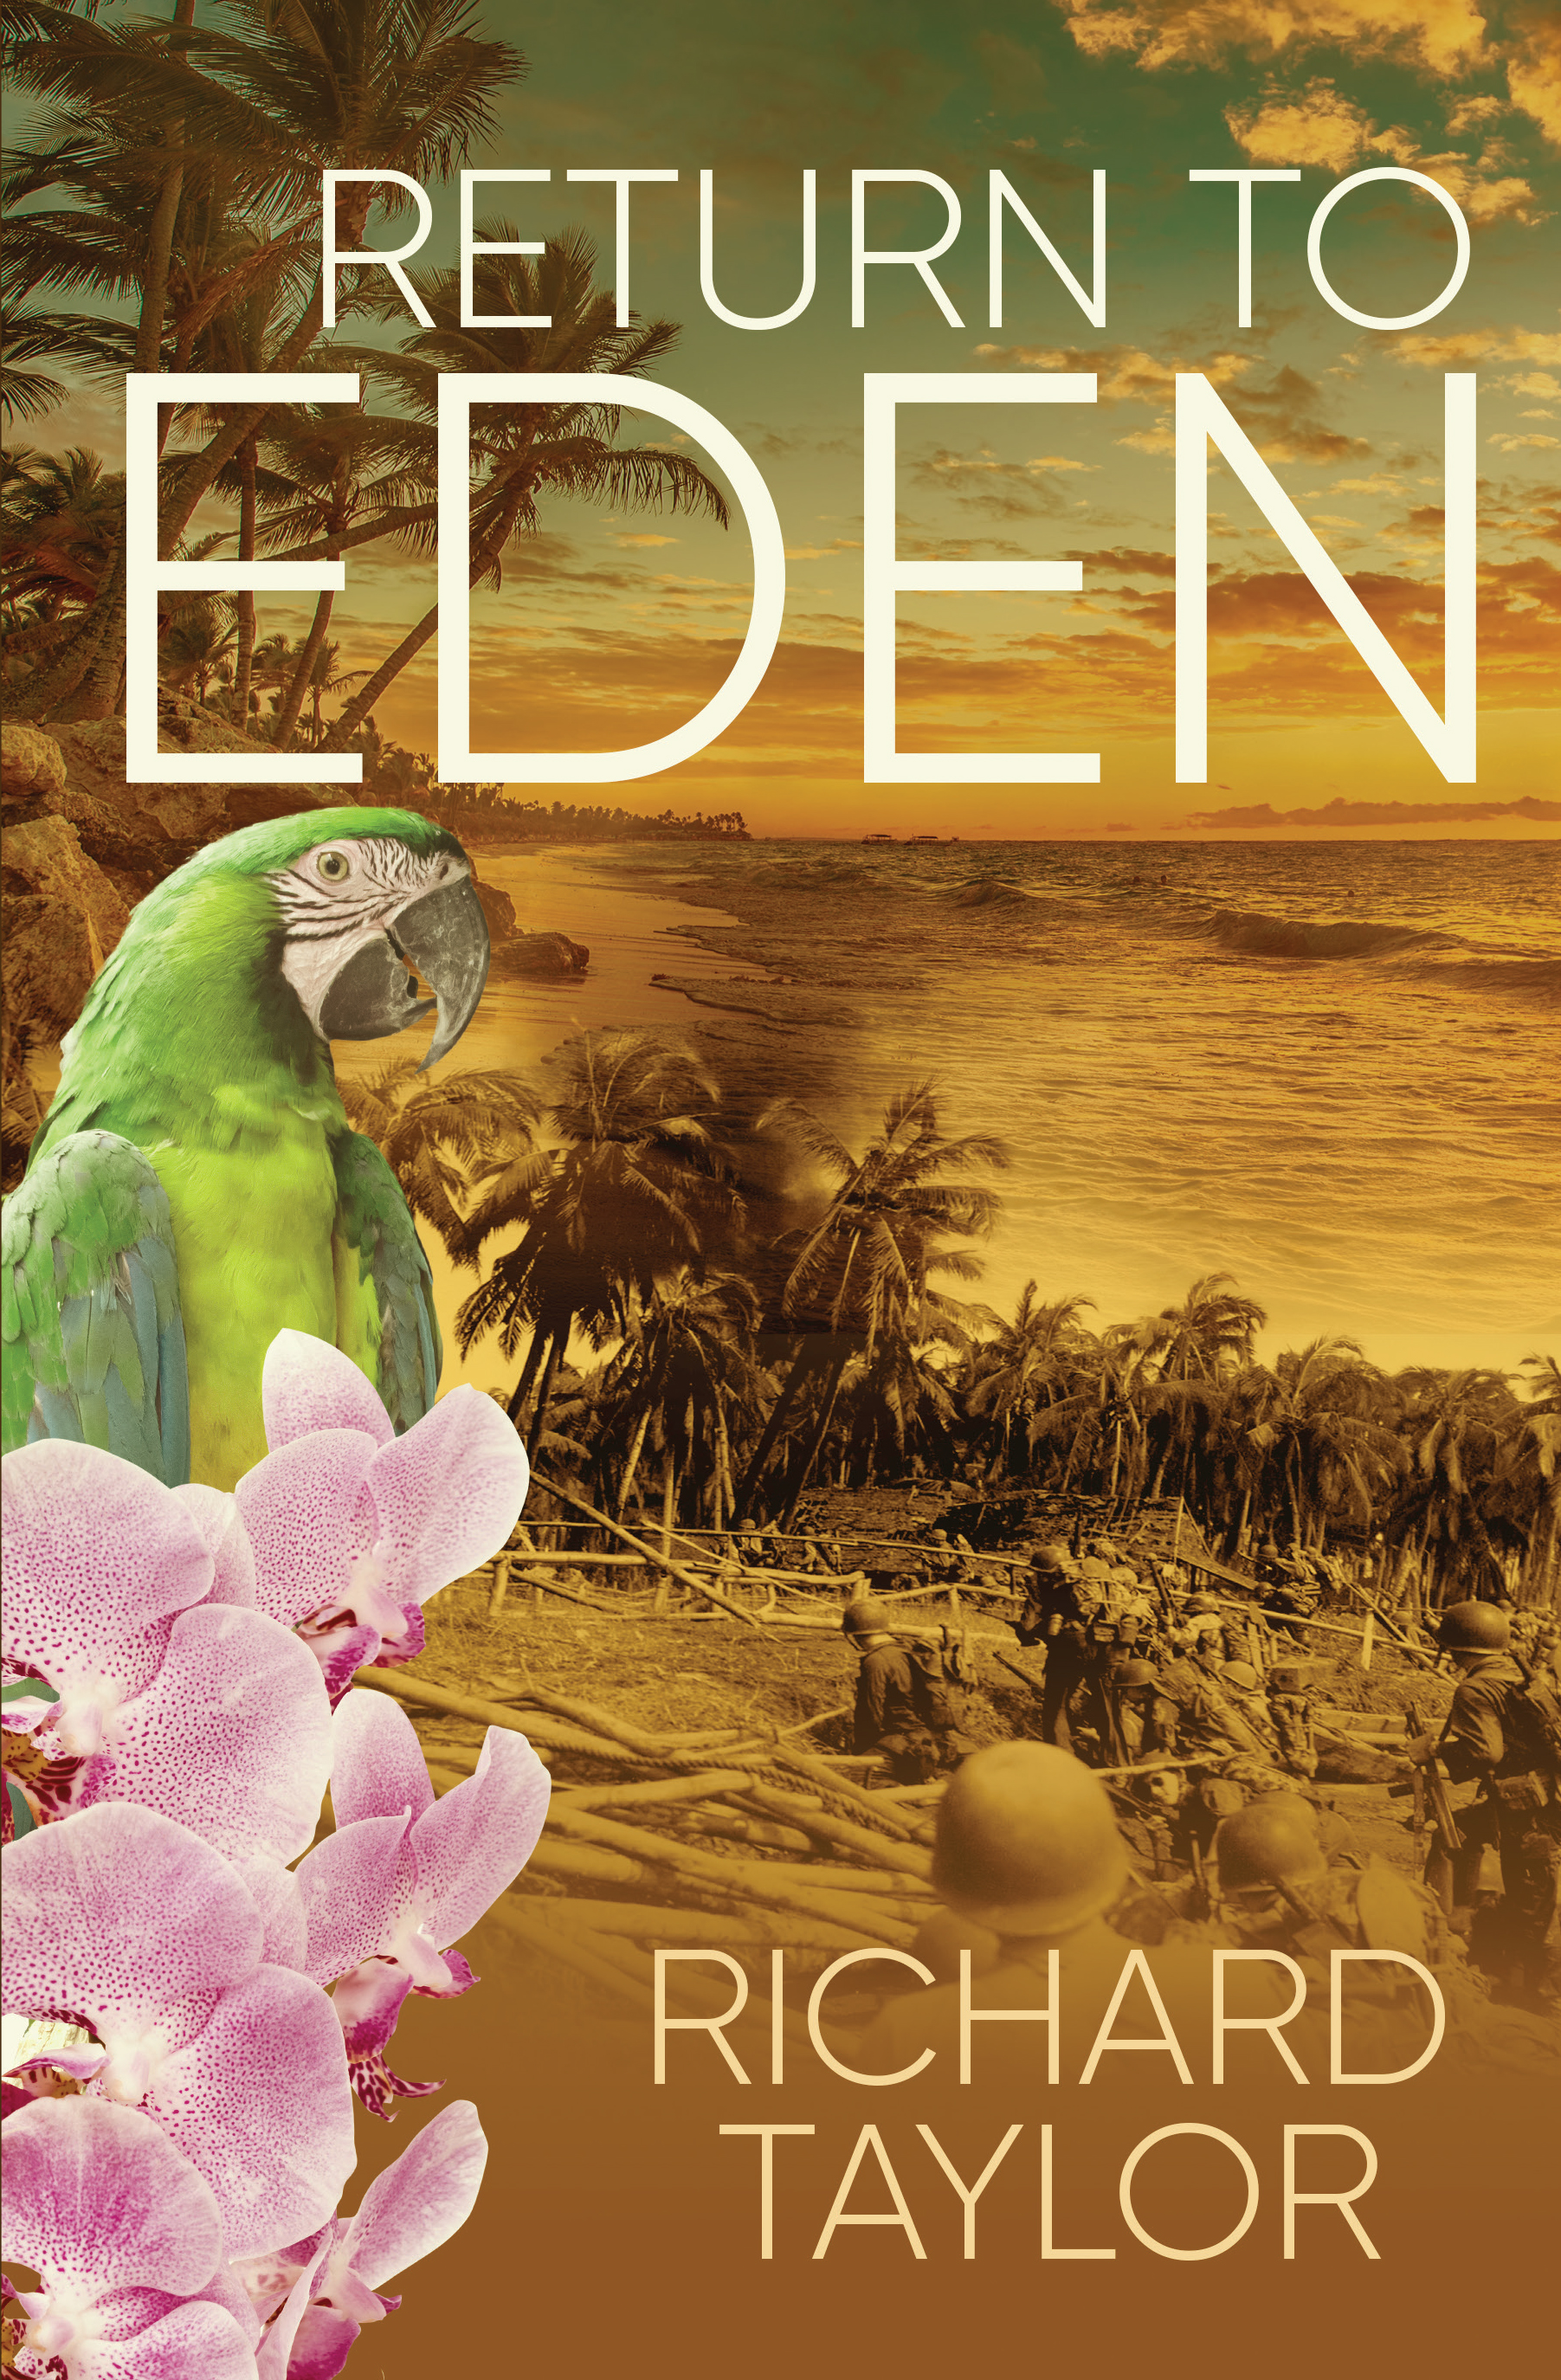 The Hollywood Book Reviews Richard Taylor's Return to Eden